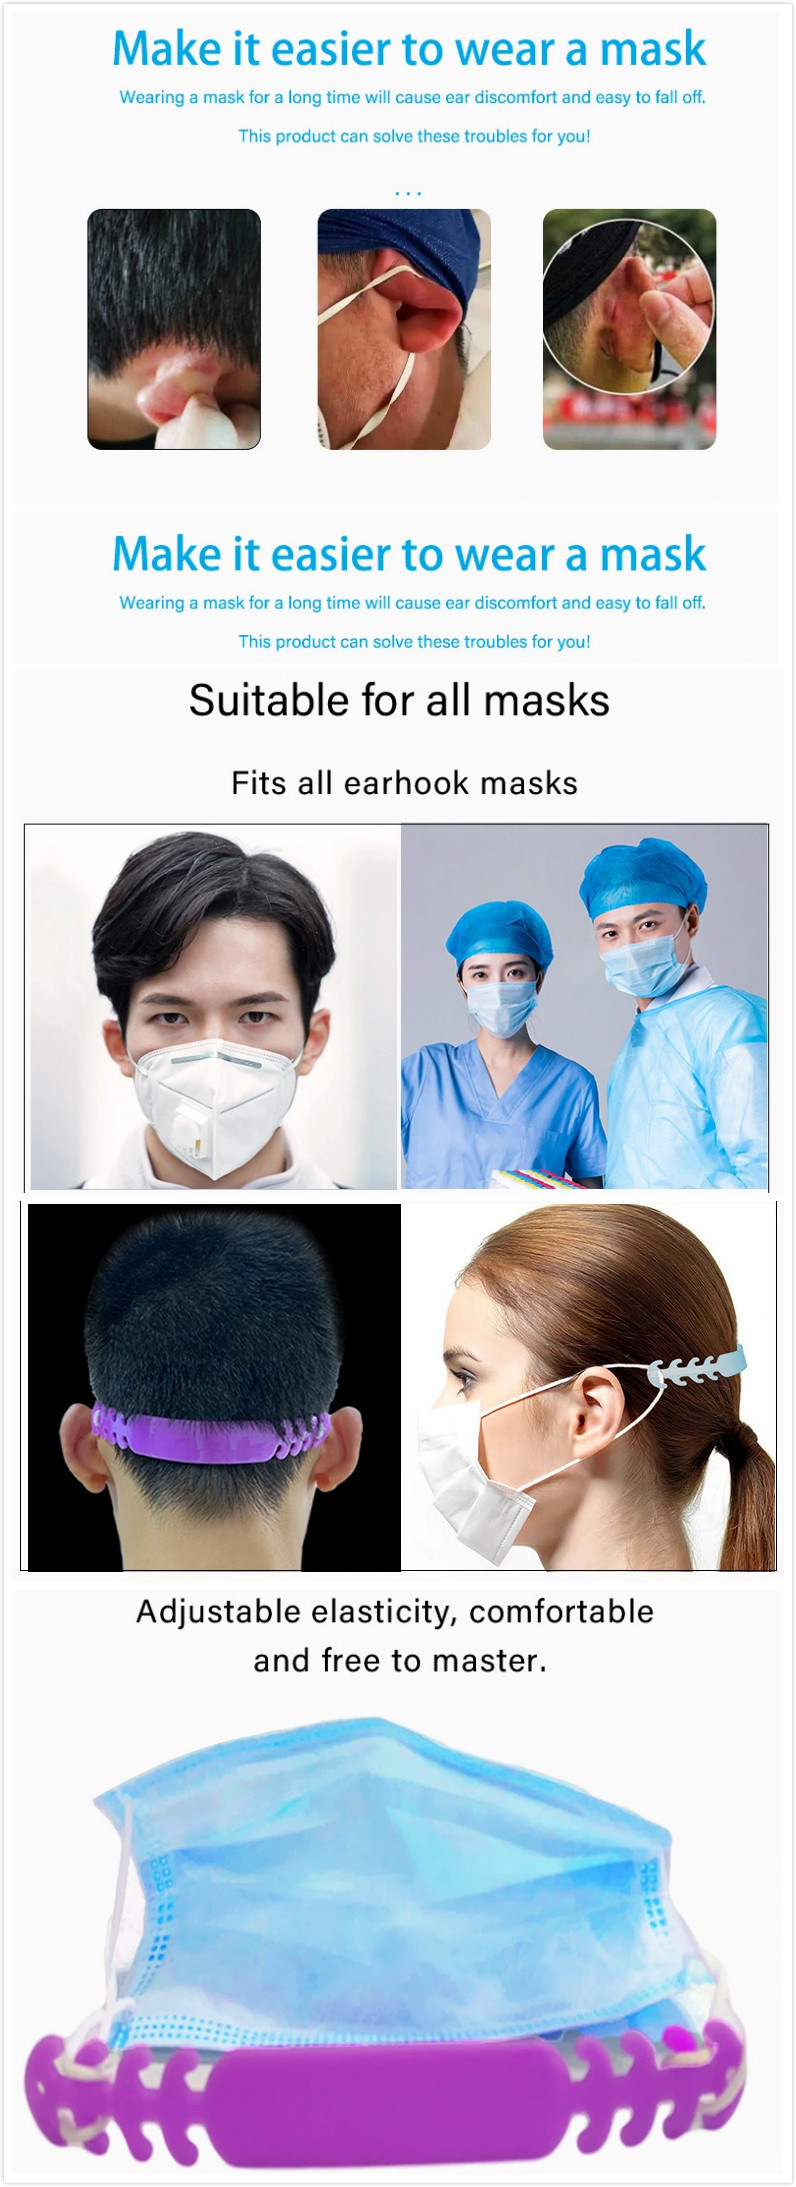 Reusable Silicone Face Mask Ear Accessories Hook for Adjusting Ear Rope Pain to Relieve Ear Fatigue